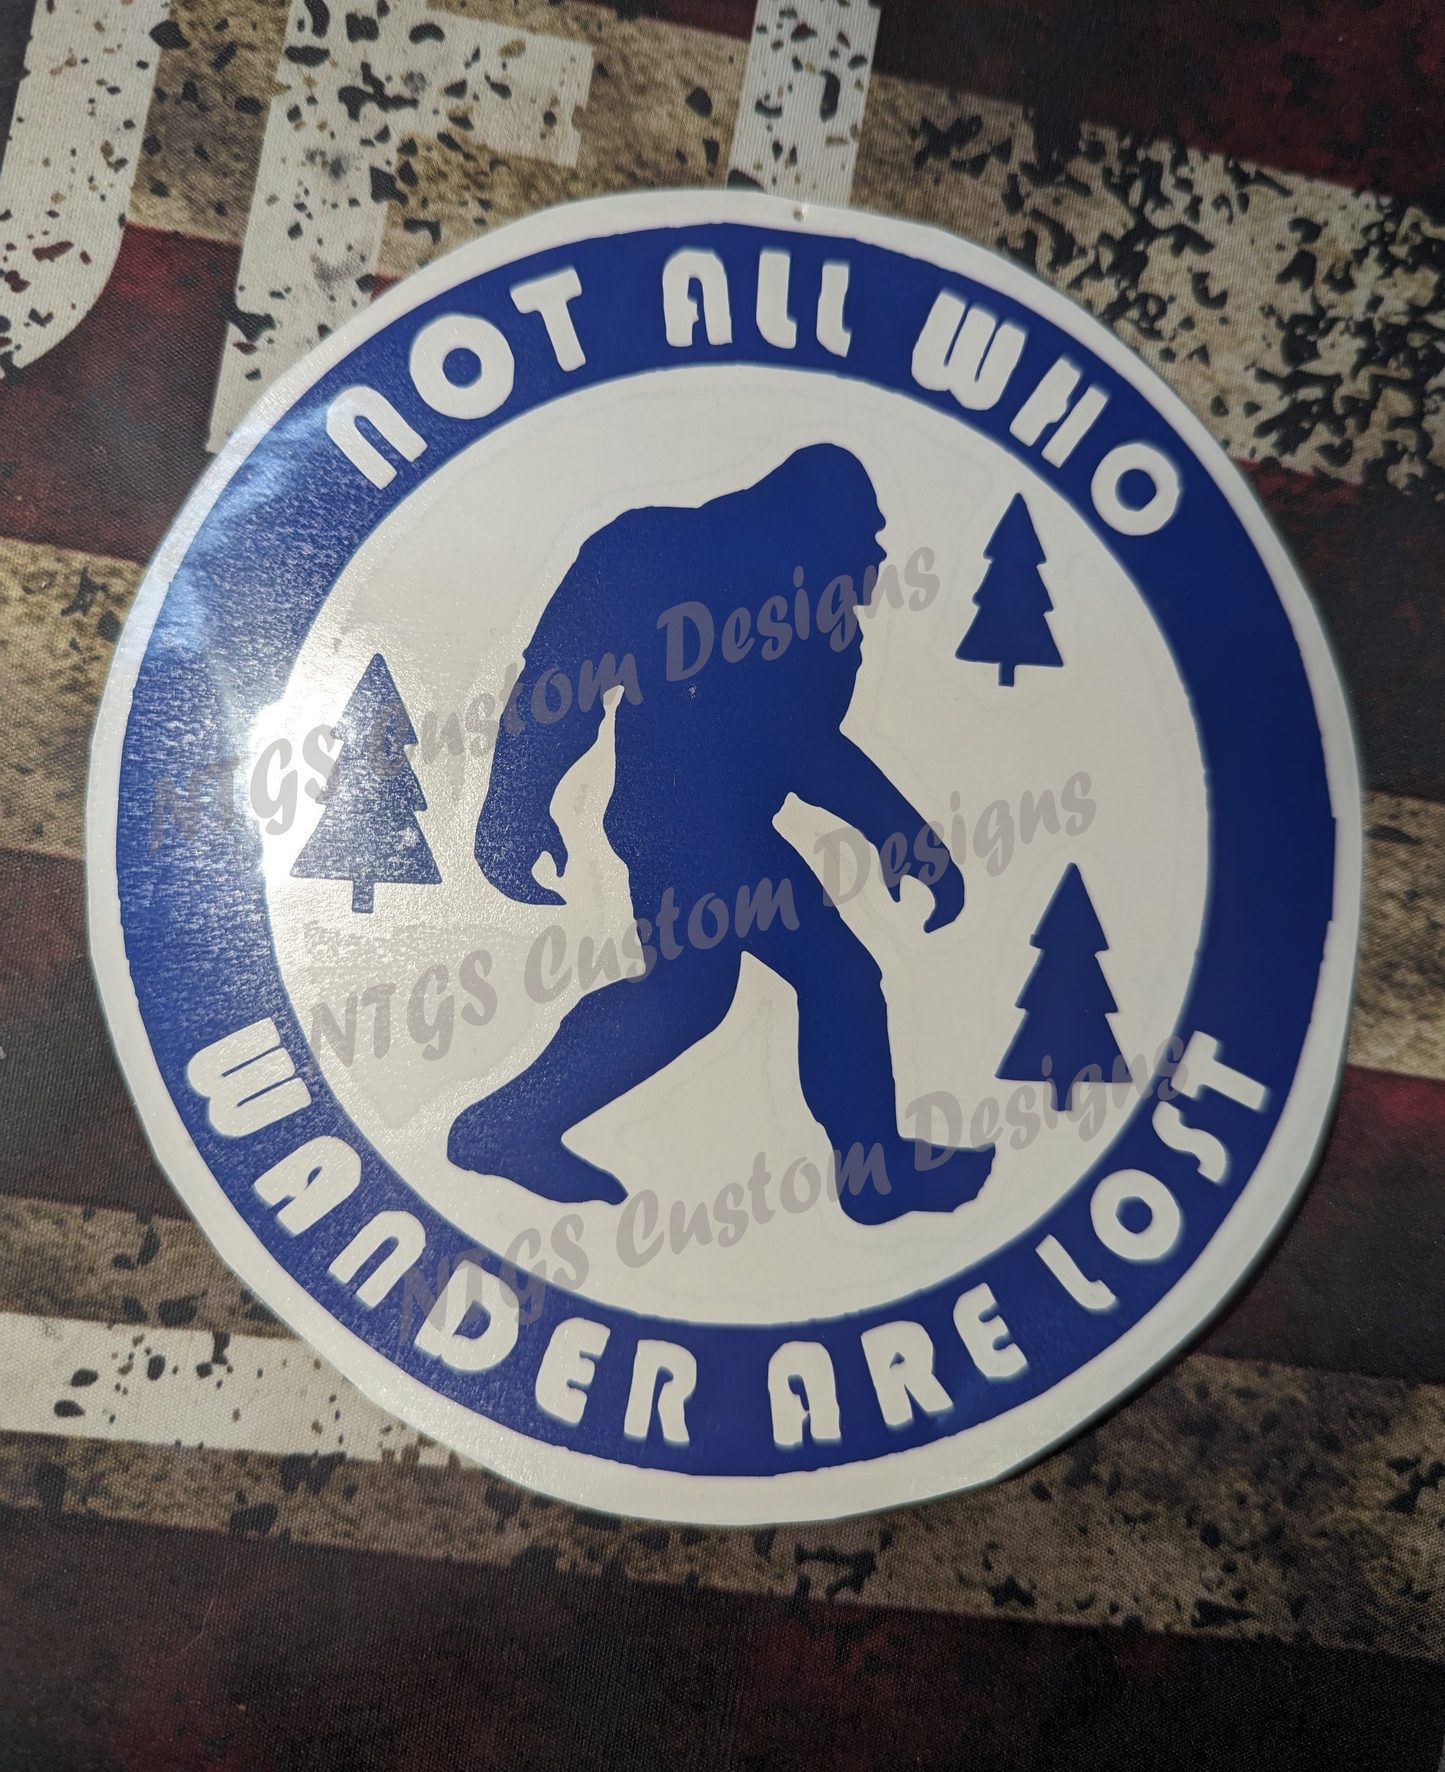 Not all who wander are lost- bigfoot